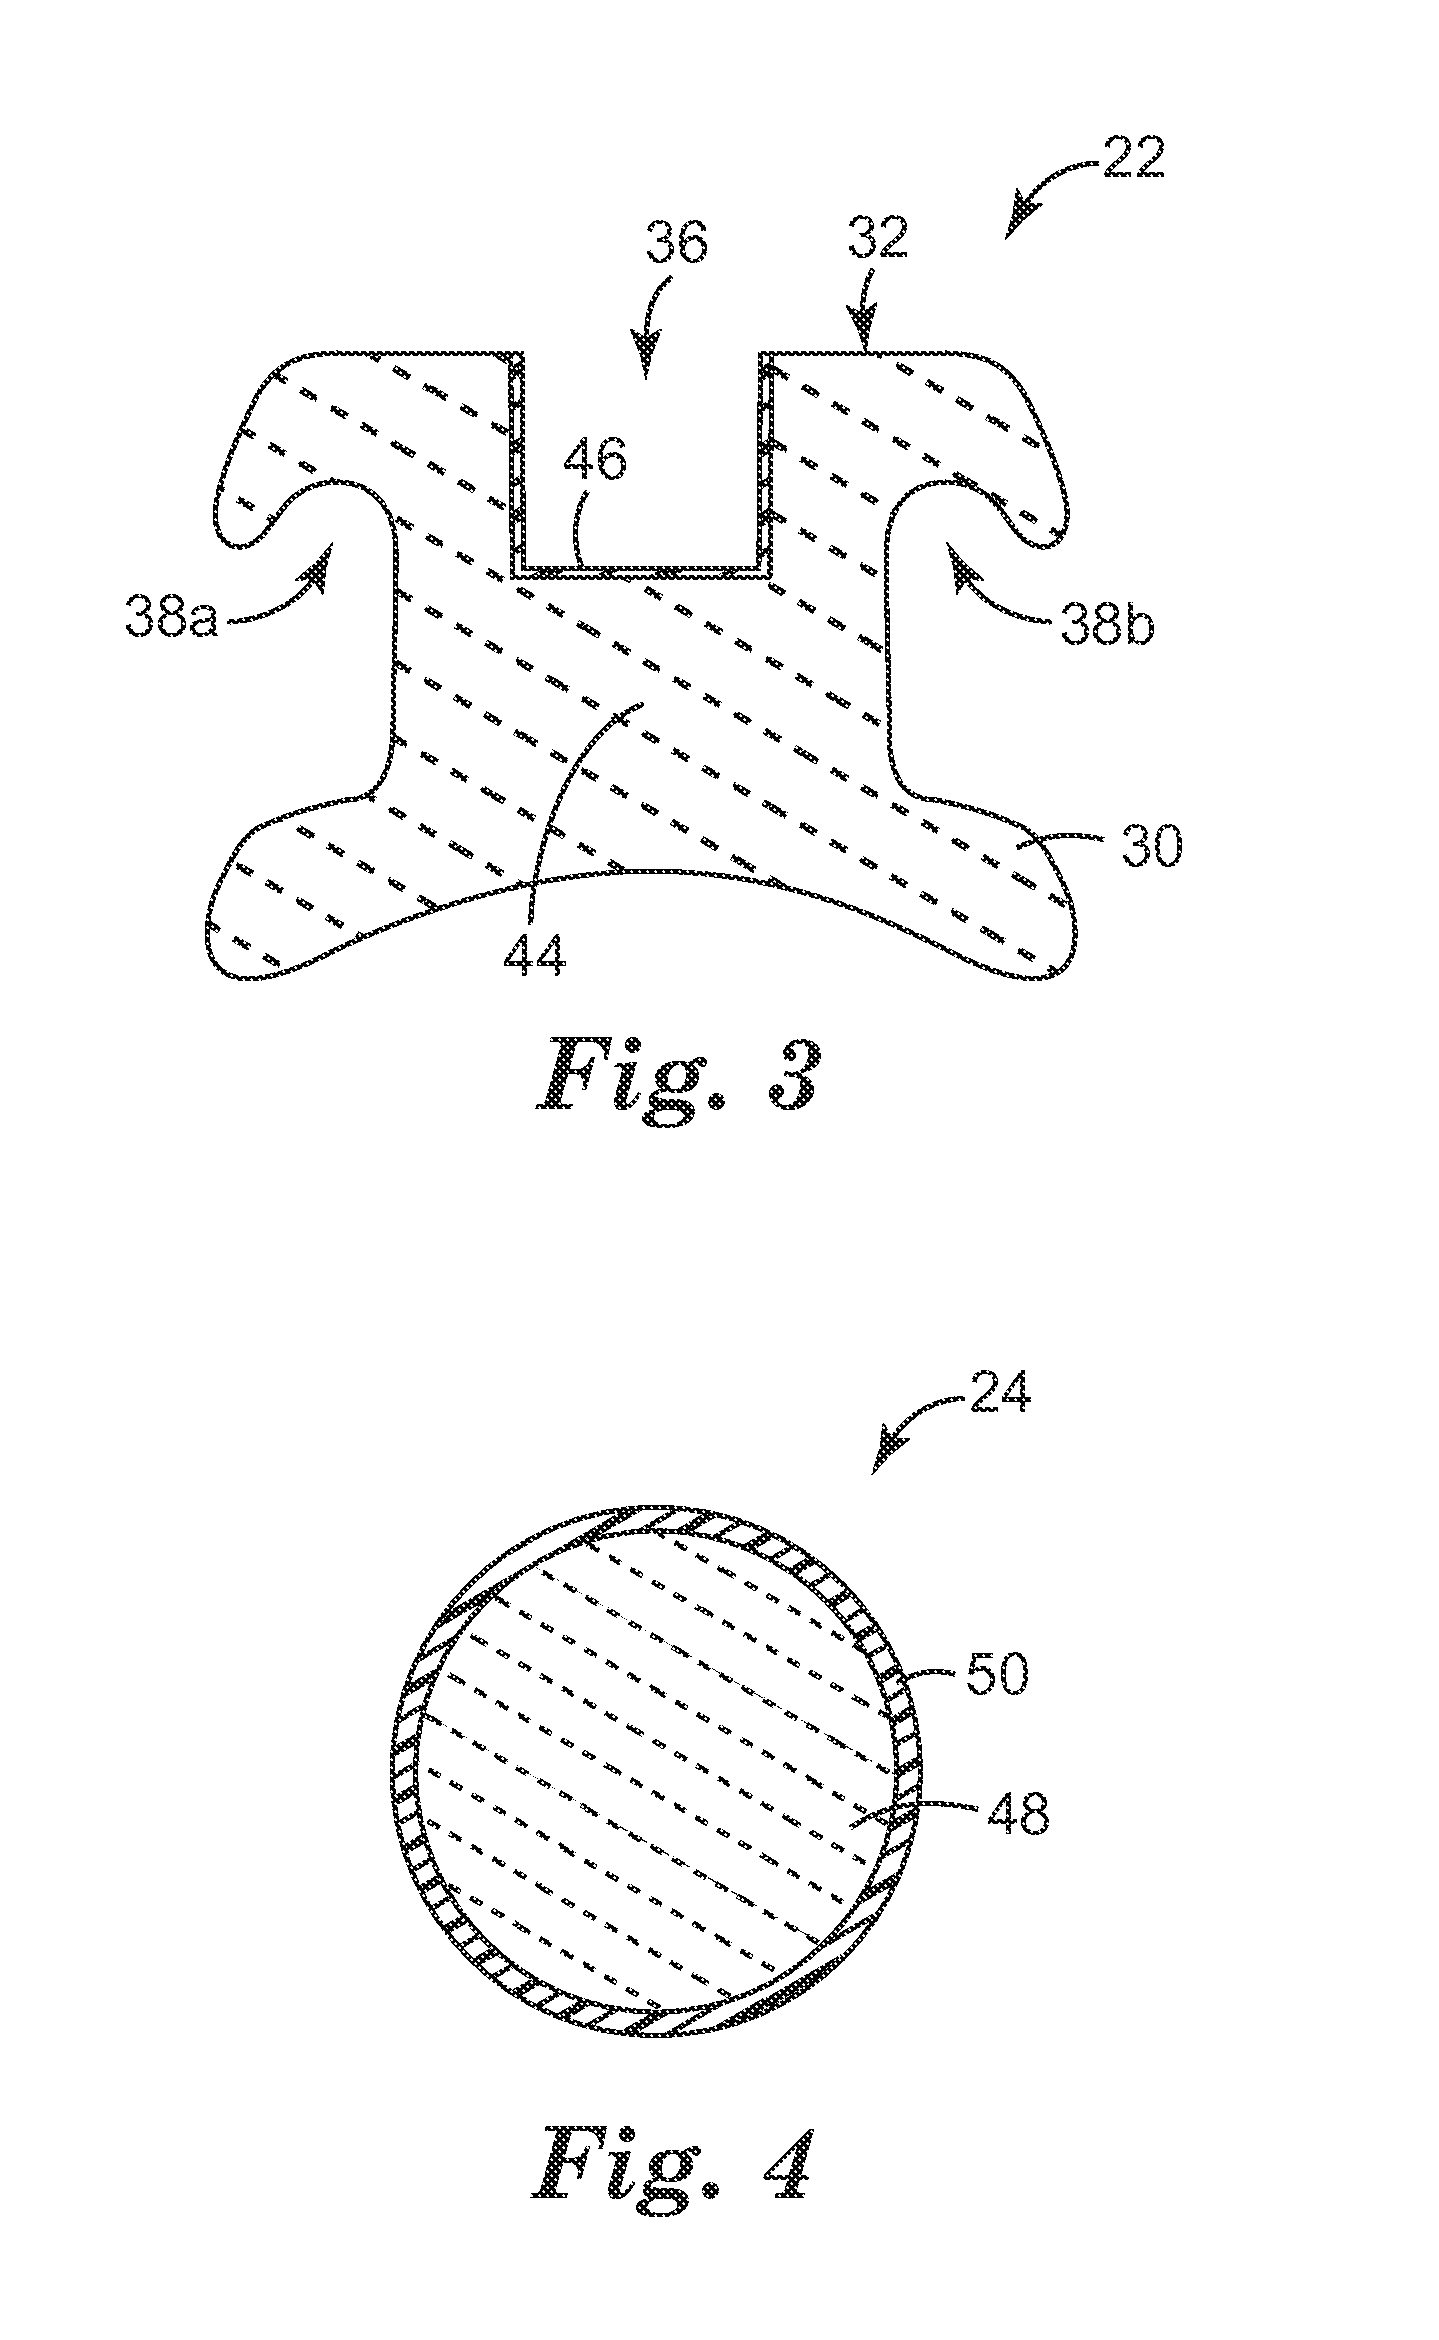 Coated Dental Articles and Related Methods of Manufacture